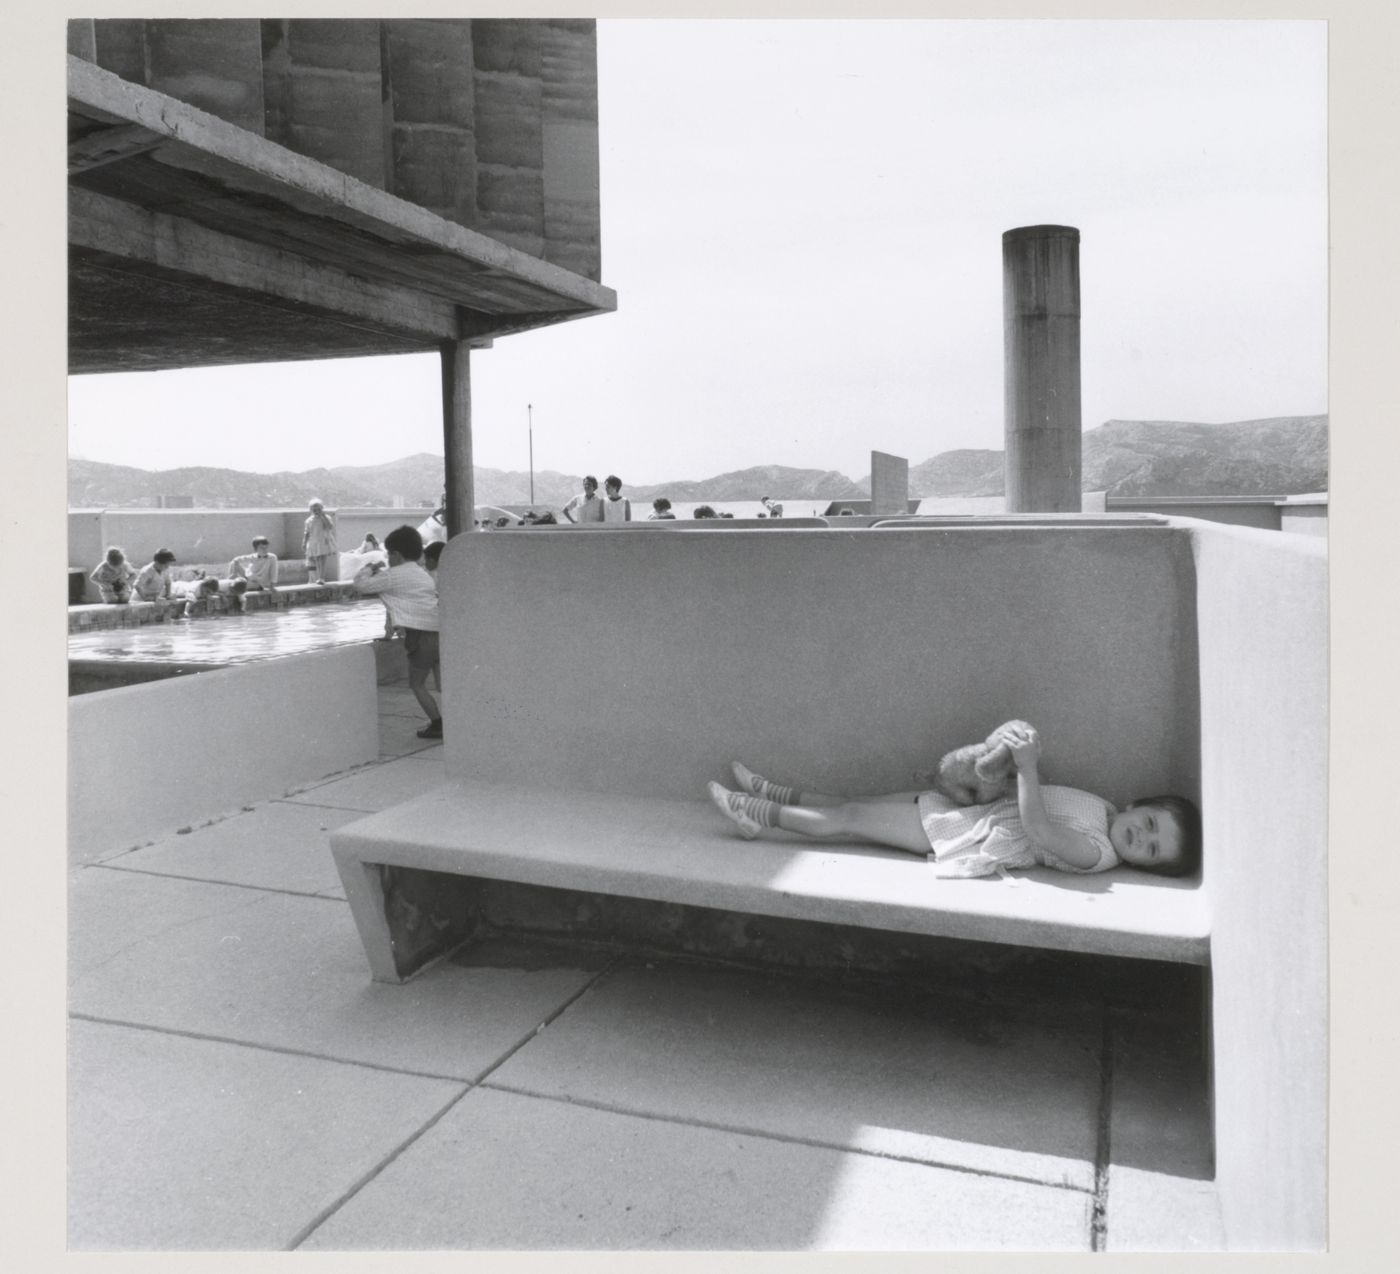 View of the roof of Unité d'habitation showing a girl lying on a concrete bench with children playing by the pool in the background, Marseille, France